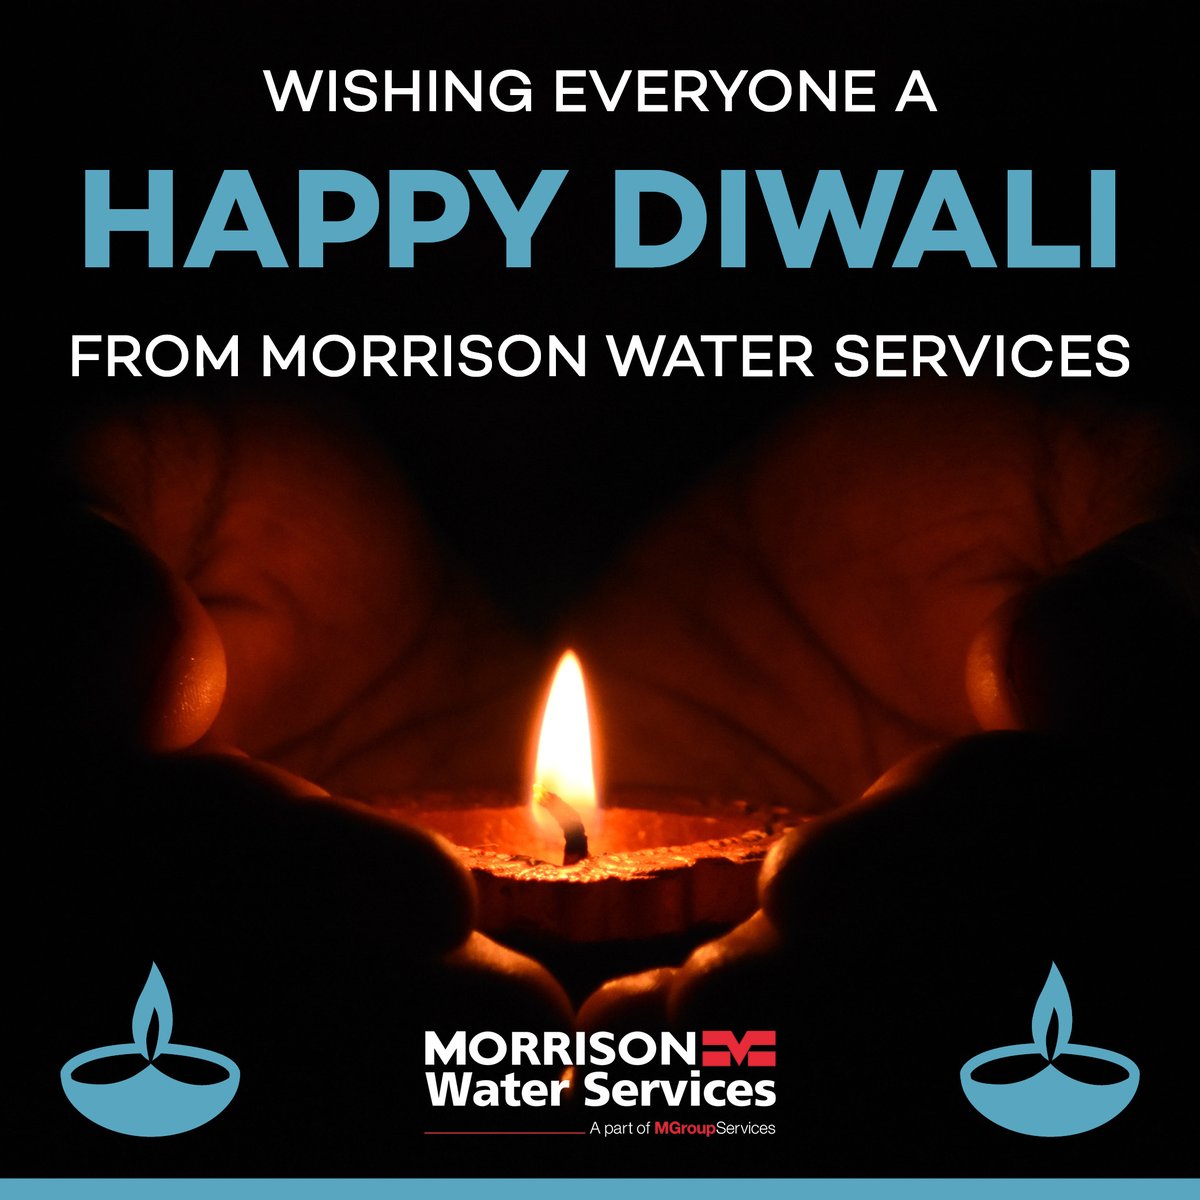 PEOPLE | We would like to wish everyone a safe and prosperous Diwali 2021. Across the Water Division, the differing beliefs, cultures and backgrounds of our people is key to our continued success. #MorrisonWaterServices #water #diwali21 #festivaloflights #diwali